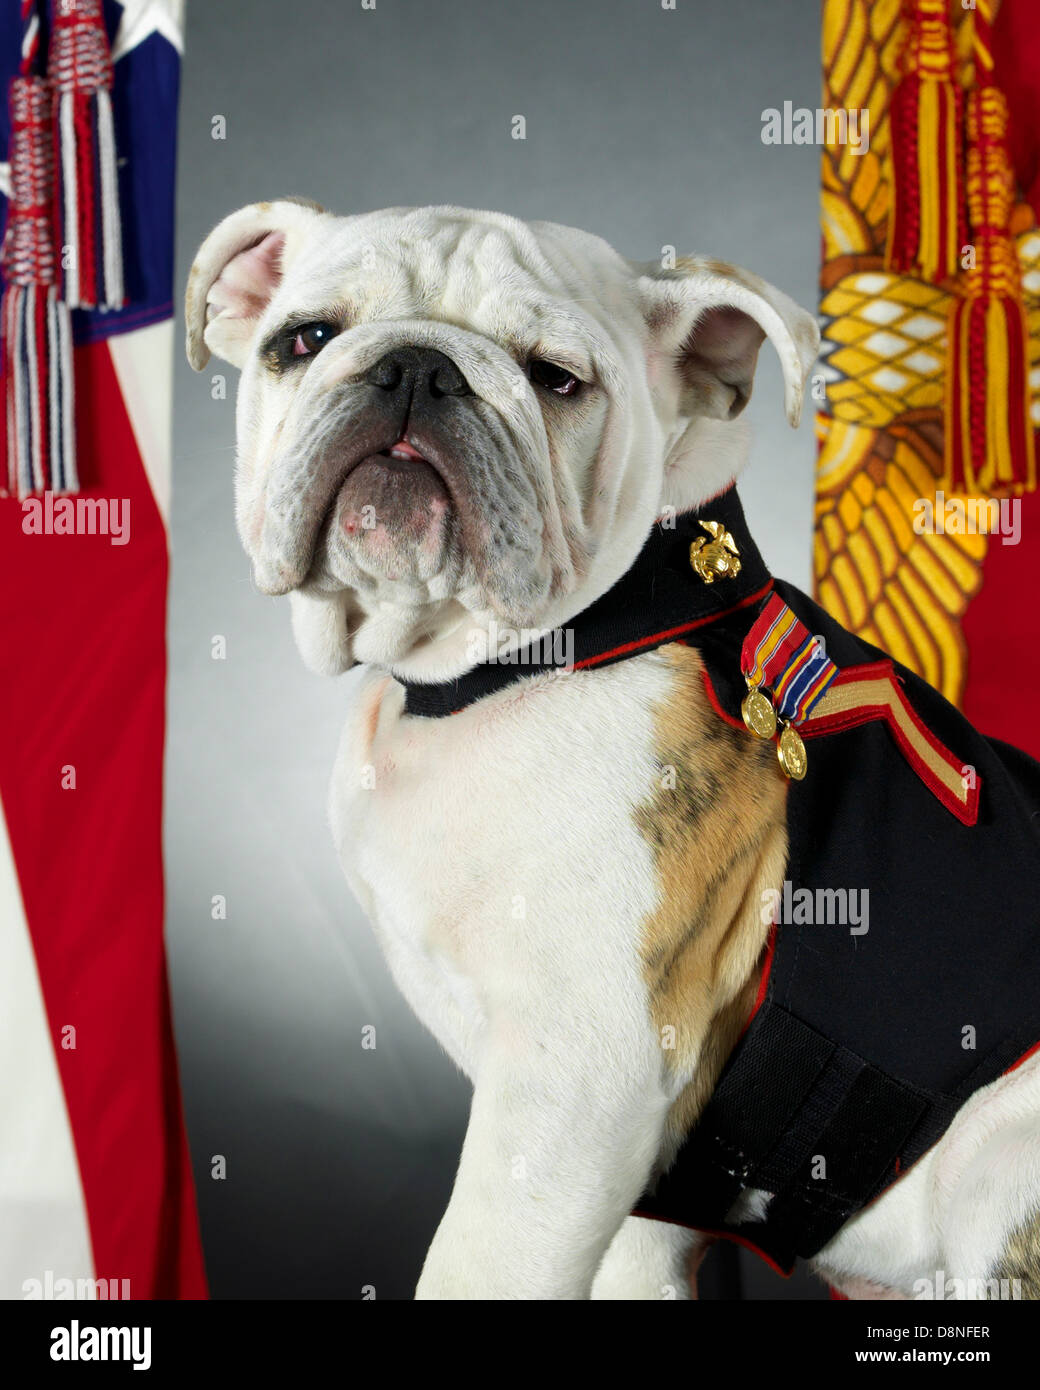 The official mascot of the United States Marine Corps, English bulldog Pfc. Chesty the XIV, sits for his official photo at the Pentagon May 15, 2013 in Arlington, VA. Chesty the XIV will officially take over as the mascot when his predecessor, Sgt. Chesty the XIII, retires in the fall of 2013. Stock Photo